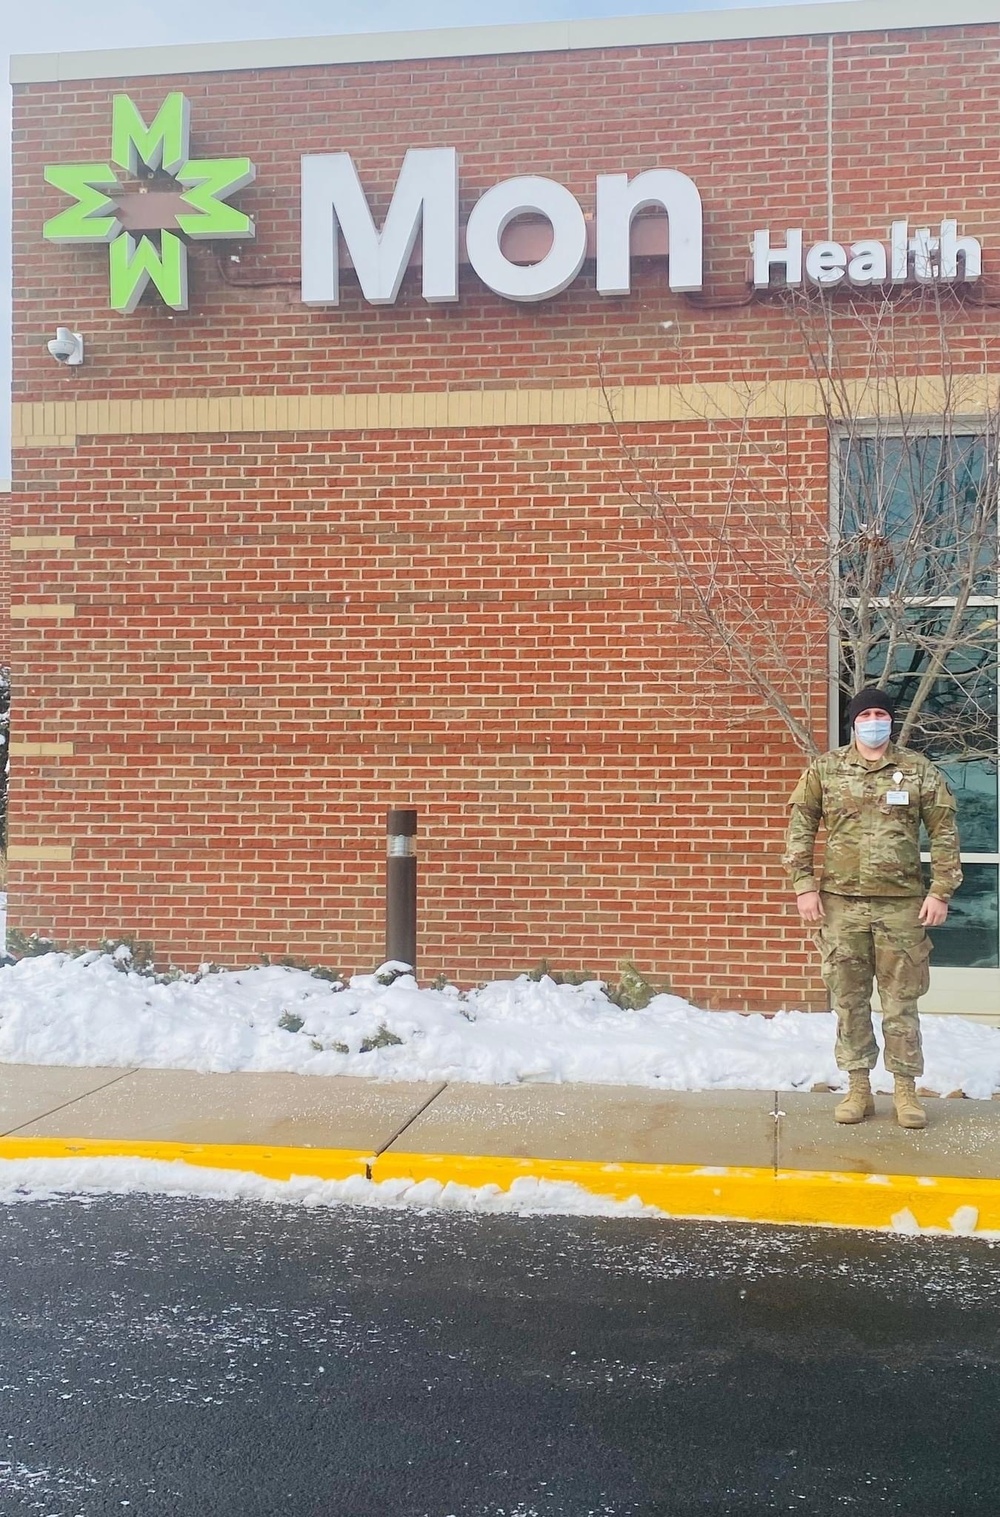 West Virginia Soldiers serve their community hospitals